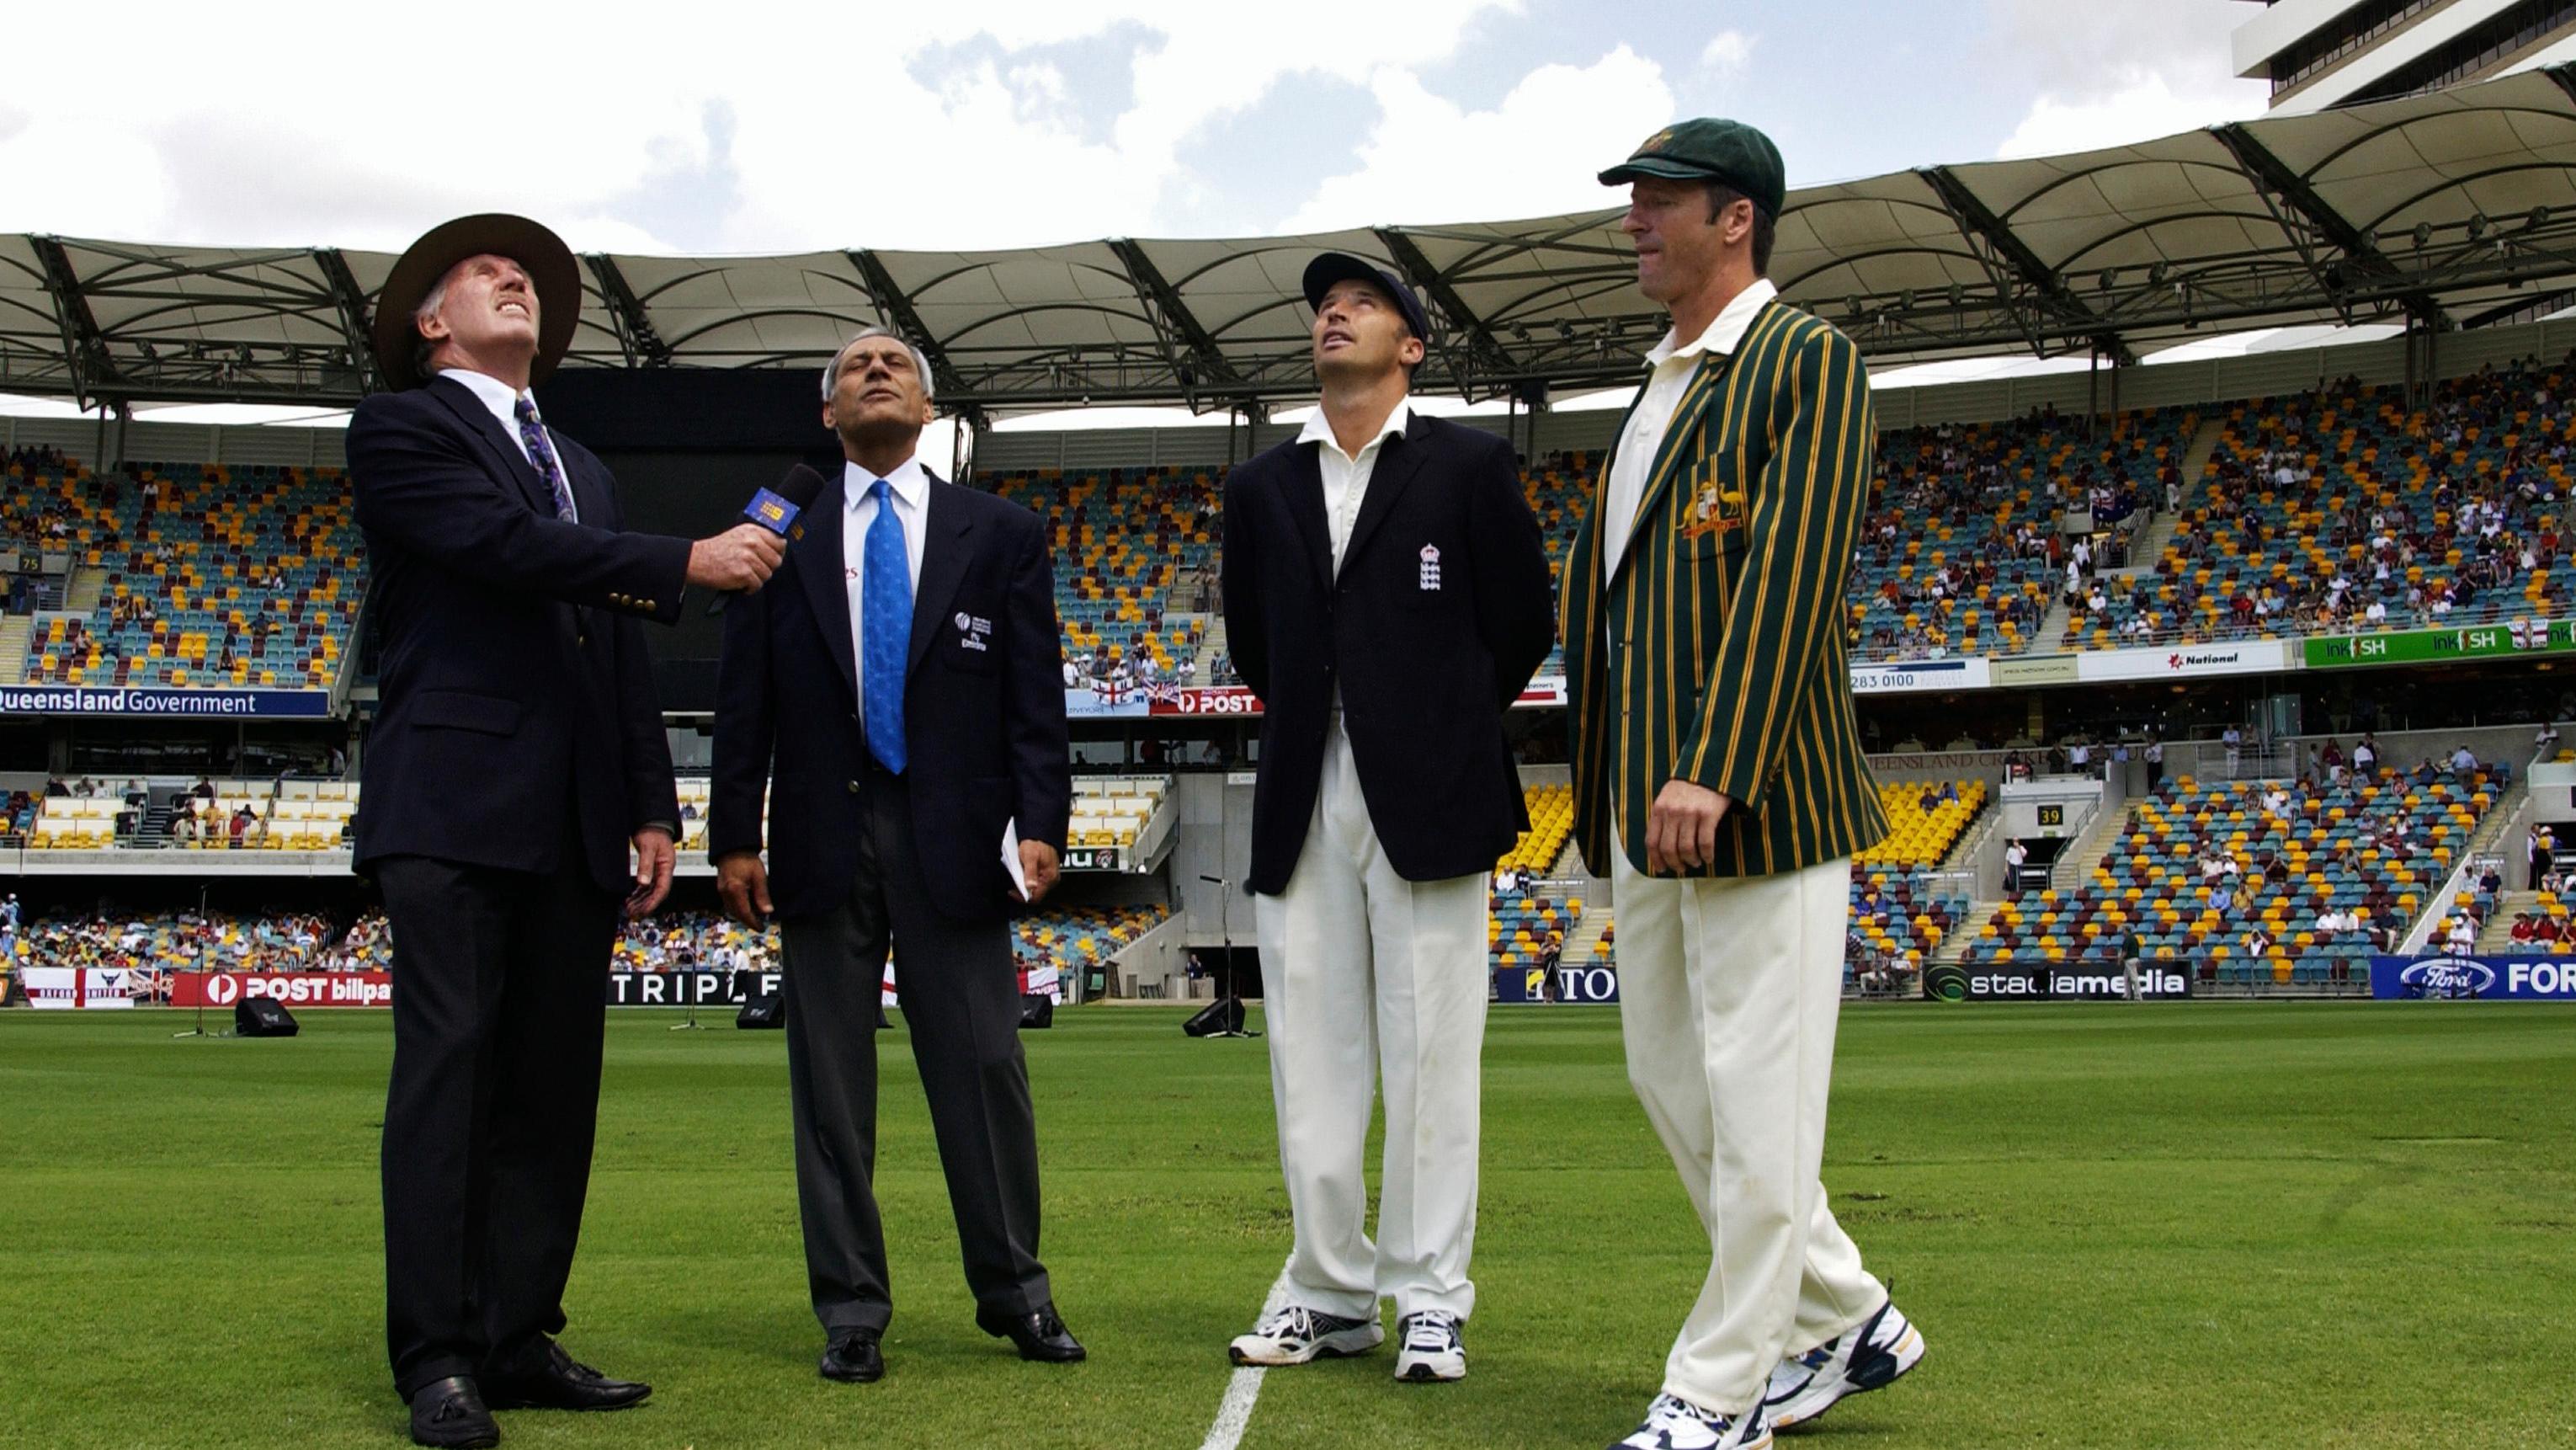 The infamous moment Nasser Hussain winning the toss at Gabba in 2002 and choosing to bowl